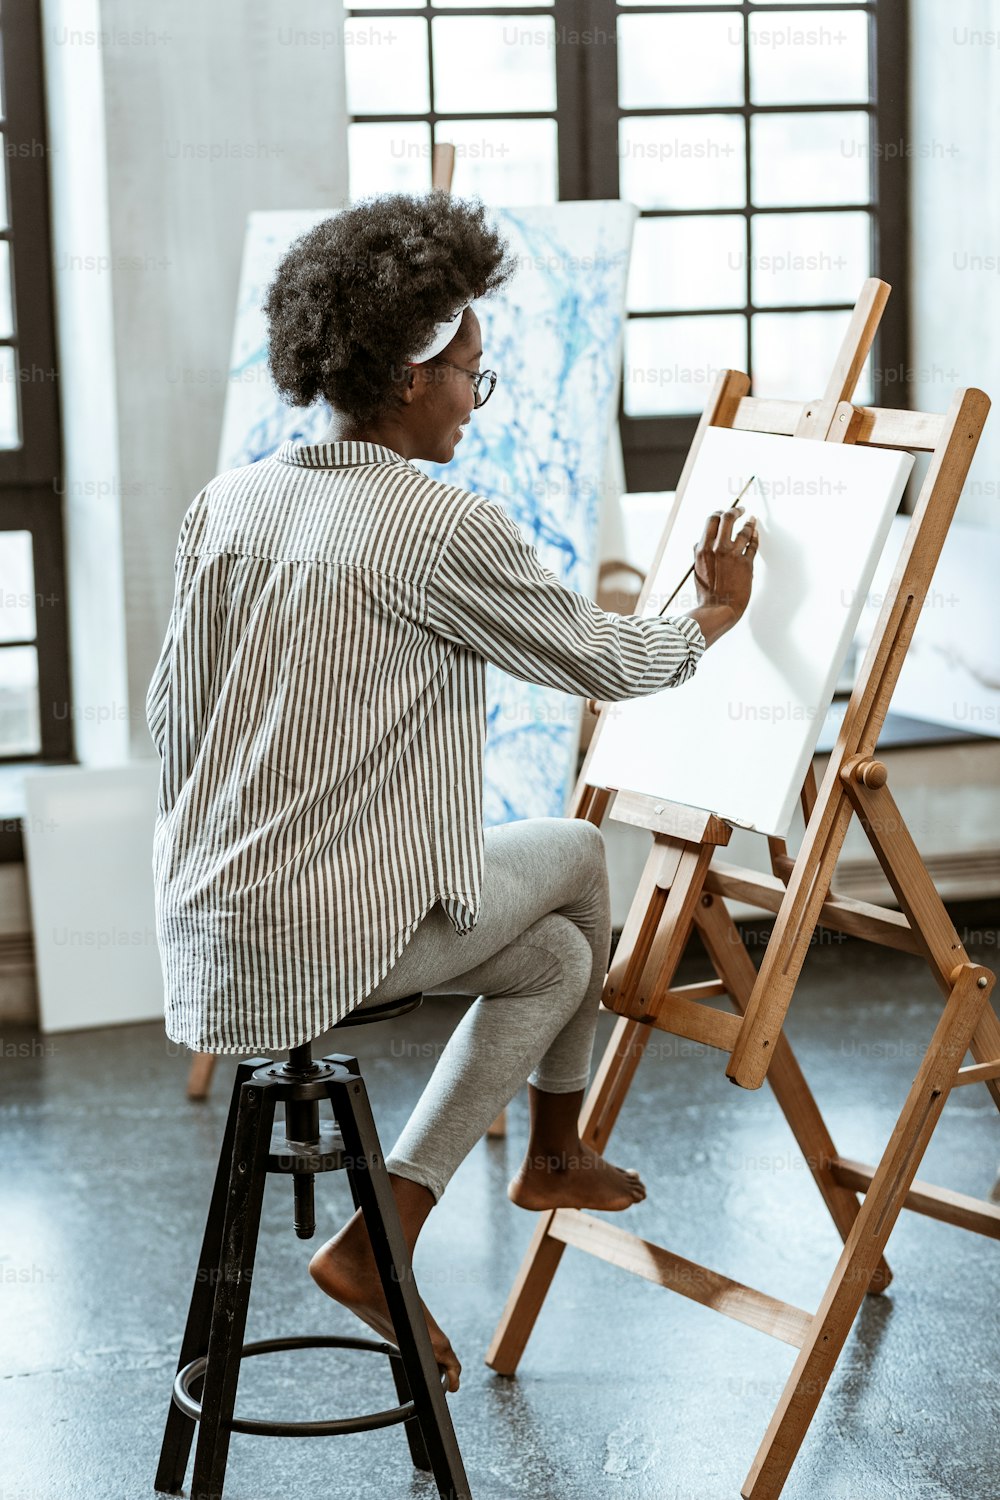 Curly artist. Young curly artist wearing striped shirt sitting on chair and painting on white canvas